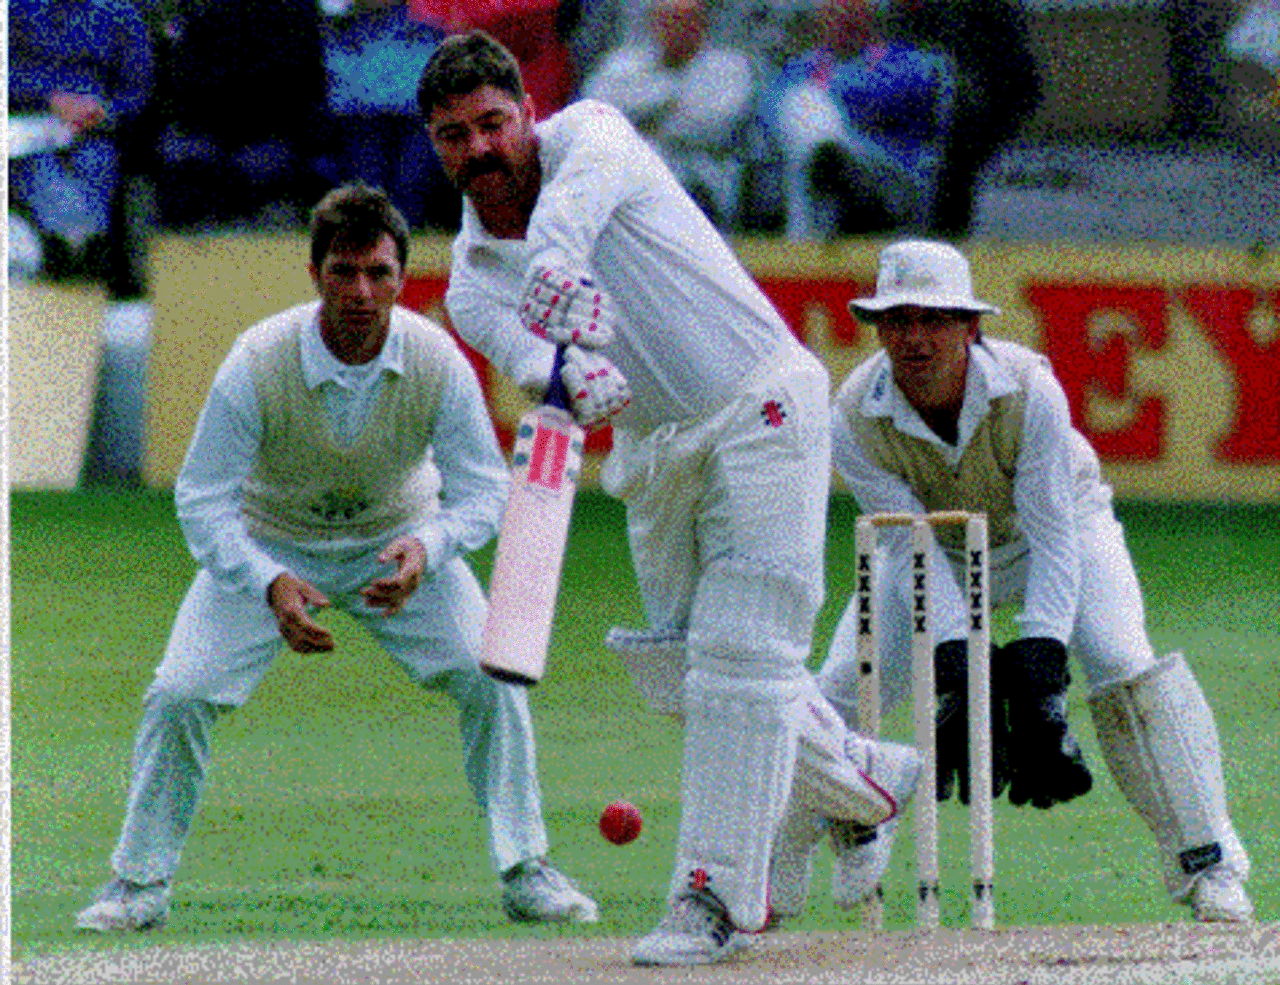 Colin Metson keeping wicket at Neath against Australia in 1993. Boon the batsman